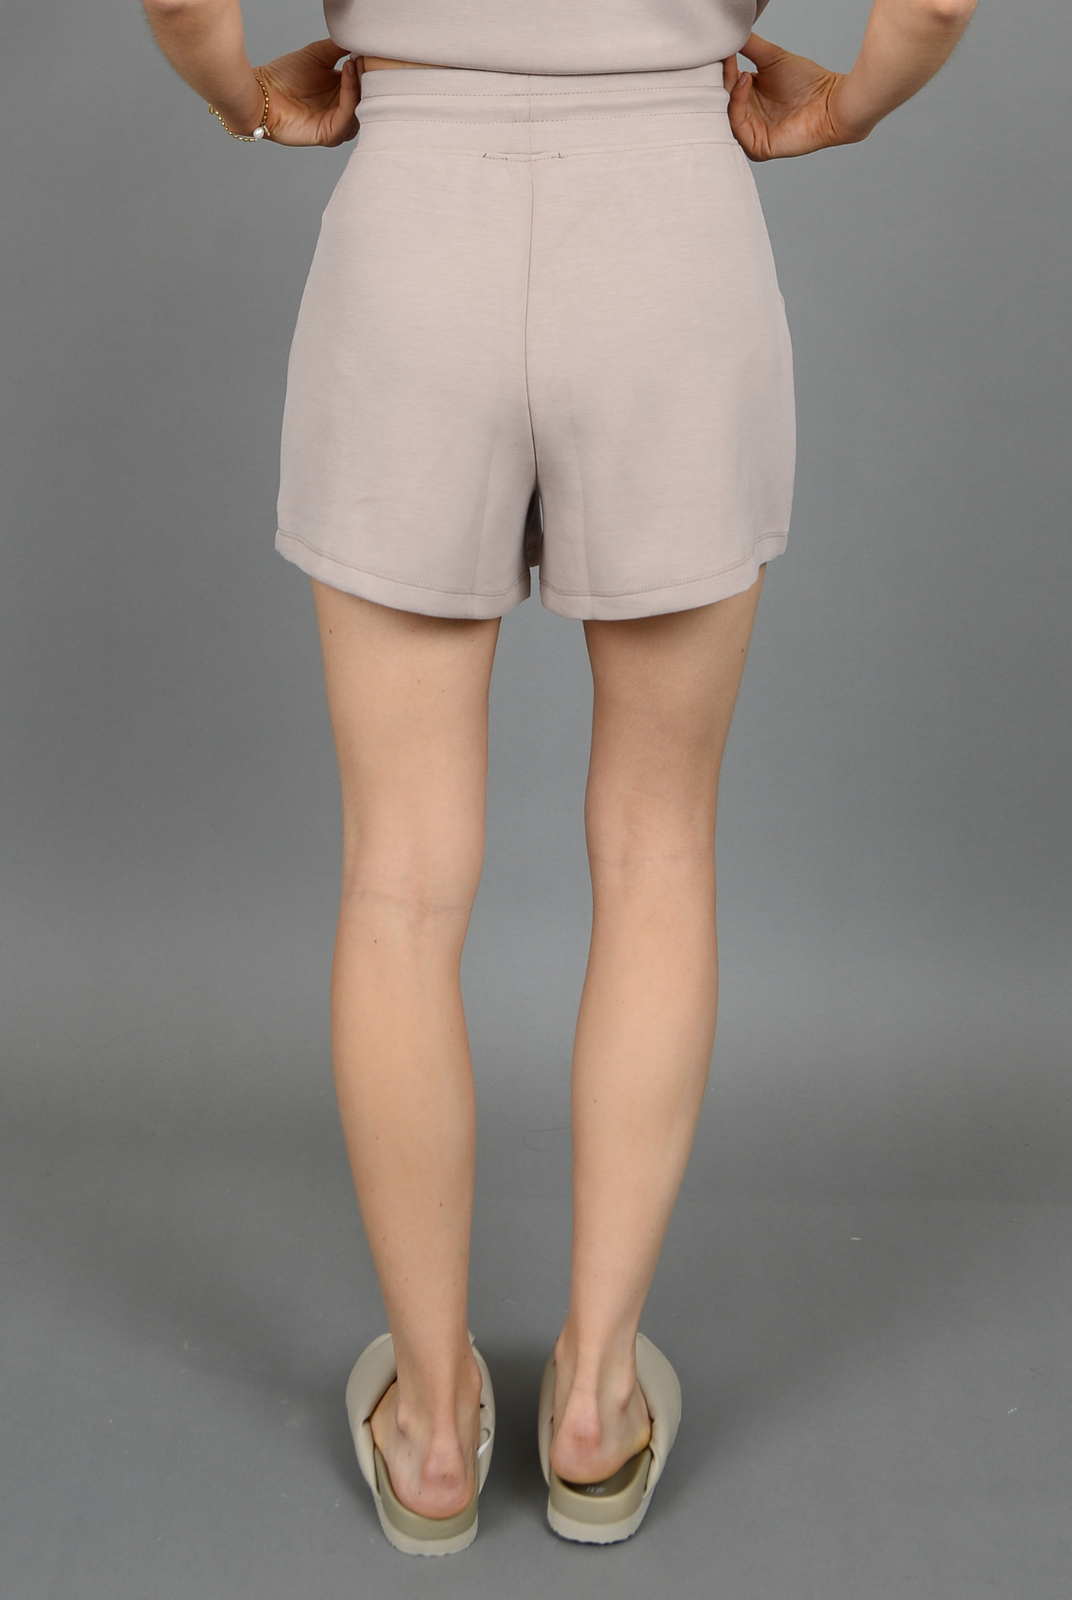 Senza Soft Scuba Shorts - Taupe. Look out Lulu - this luxe scuba fabric is THE scuba that you need in your wardrobe! So soft & comfy! The Senza shorts are the perfect fit- nice and roomy around the legs, and the perfect "not too short" length!